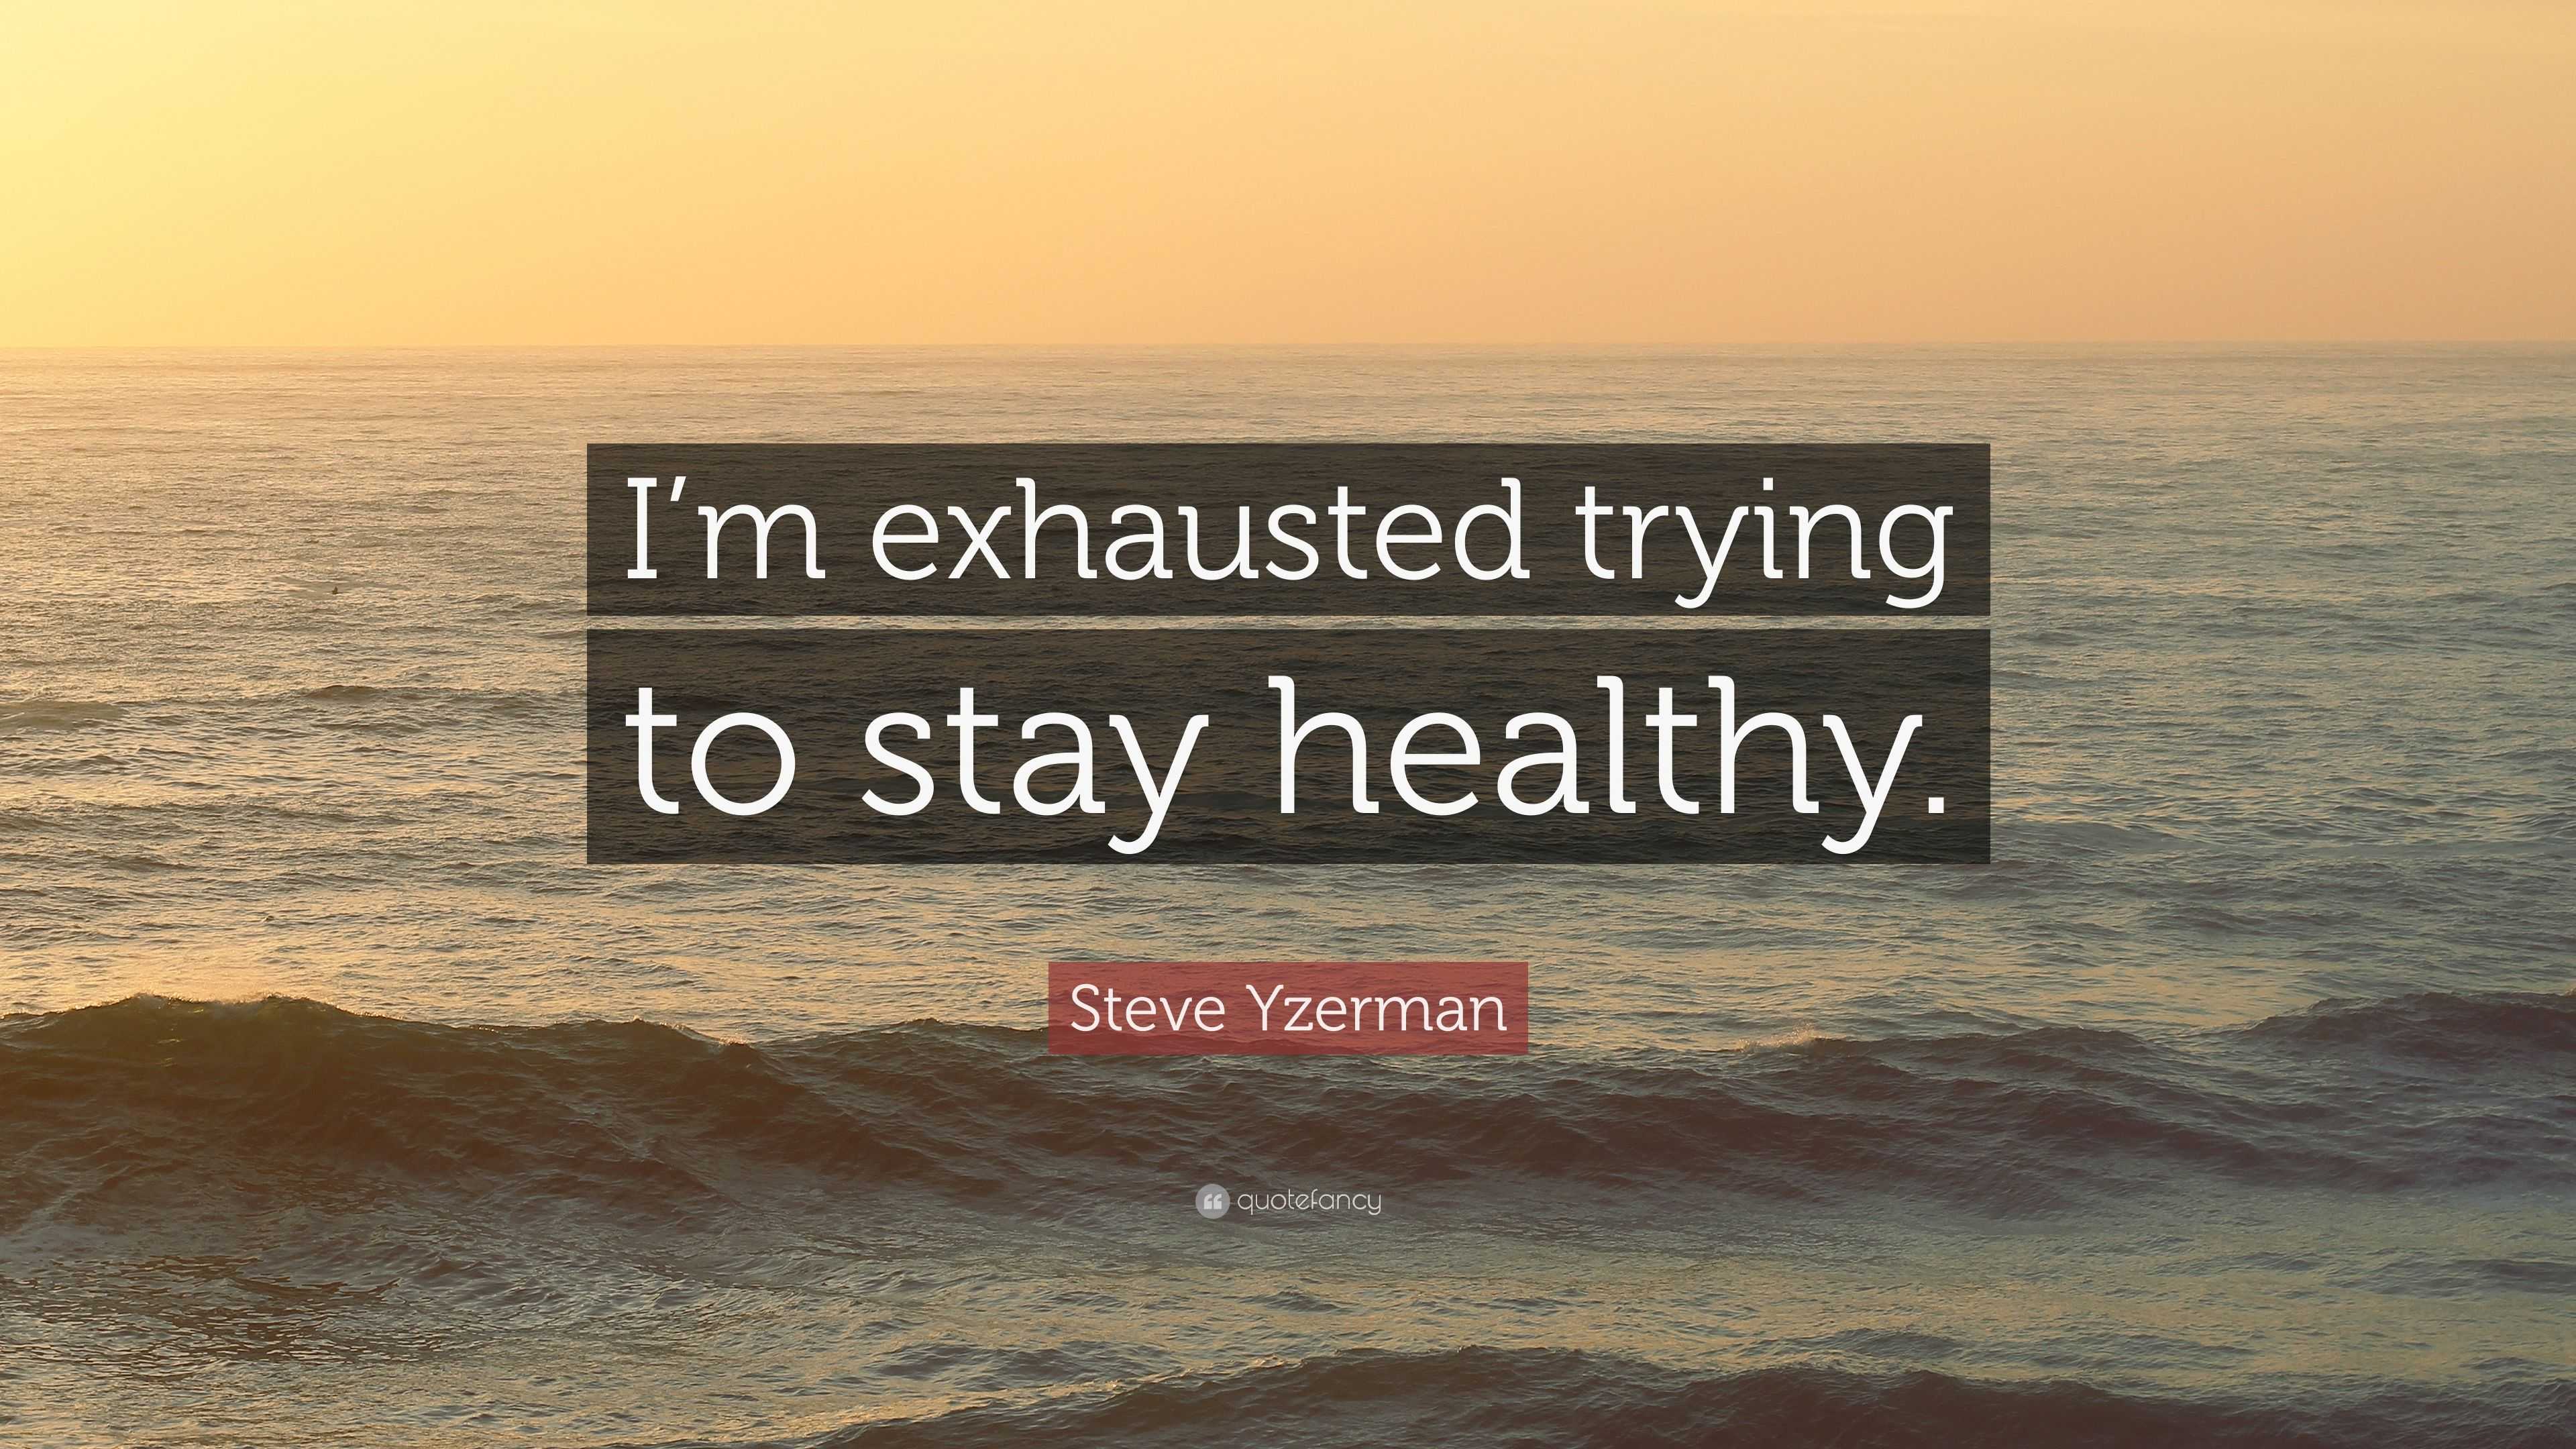 3144494-Steve-Yzerman-Quote-I-m-exhausted-trying-to-stay-healthy.jpg